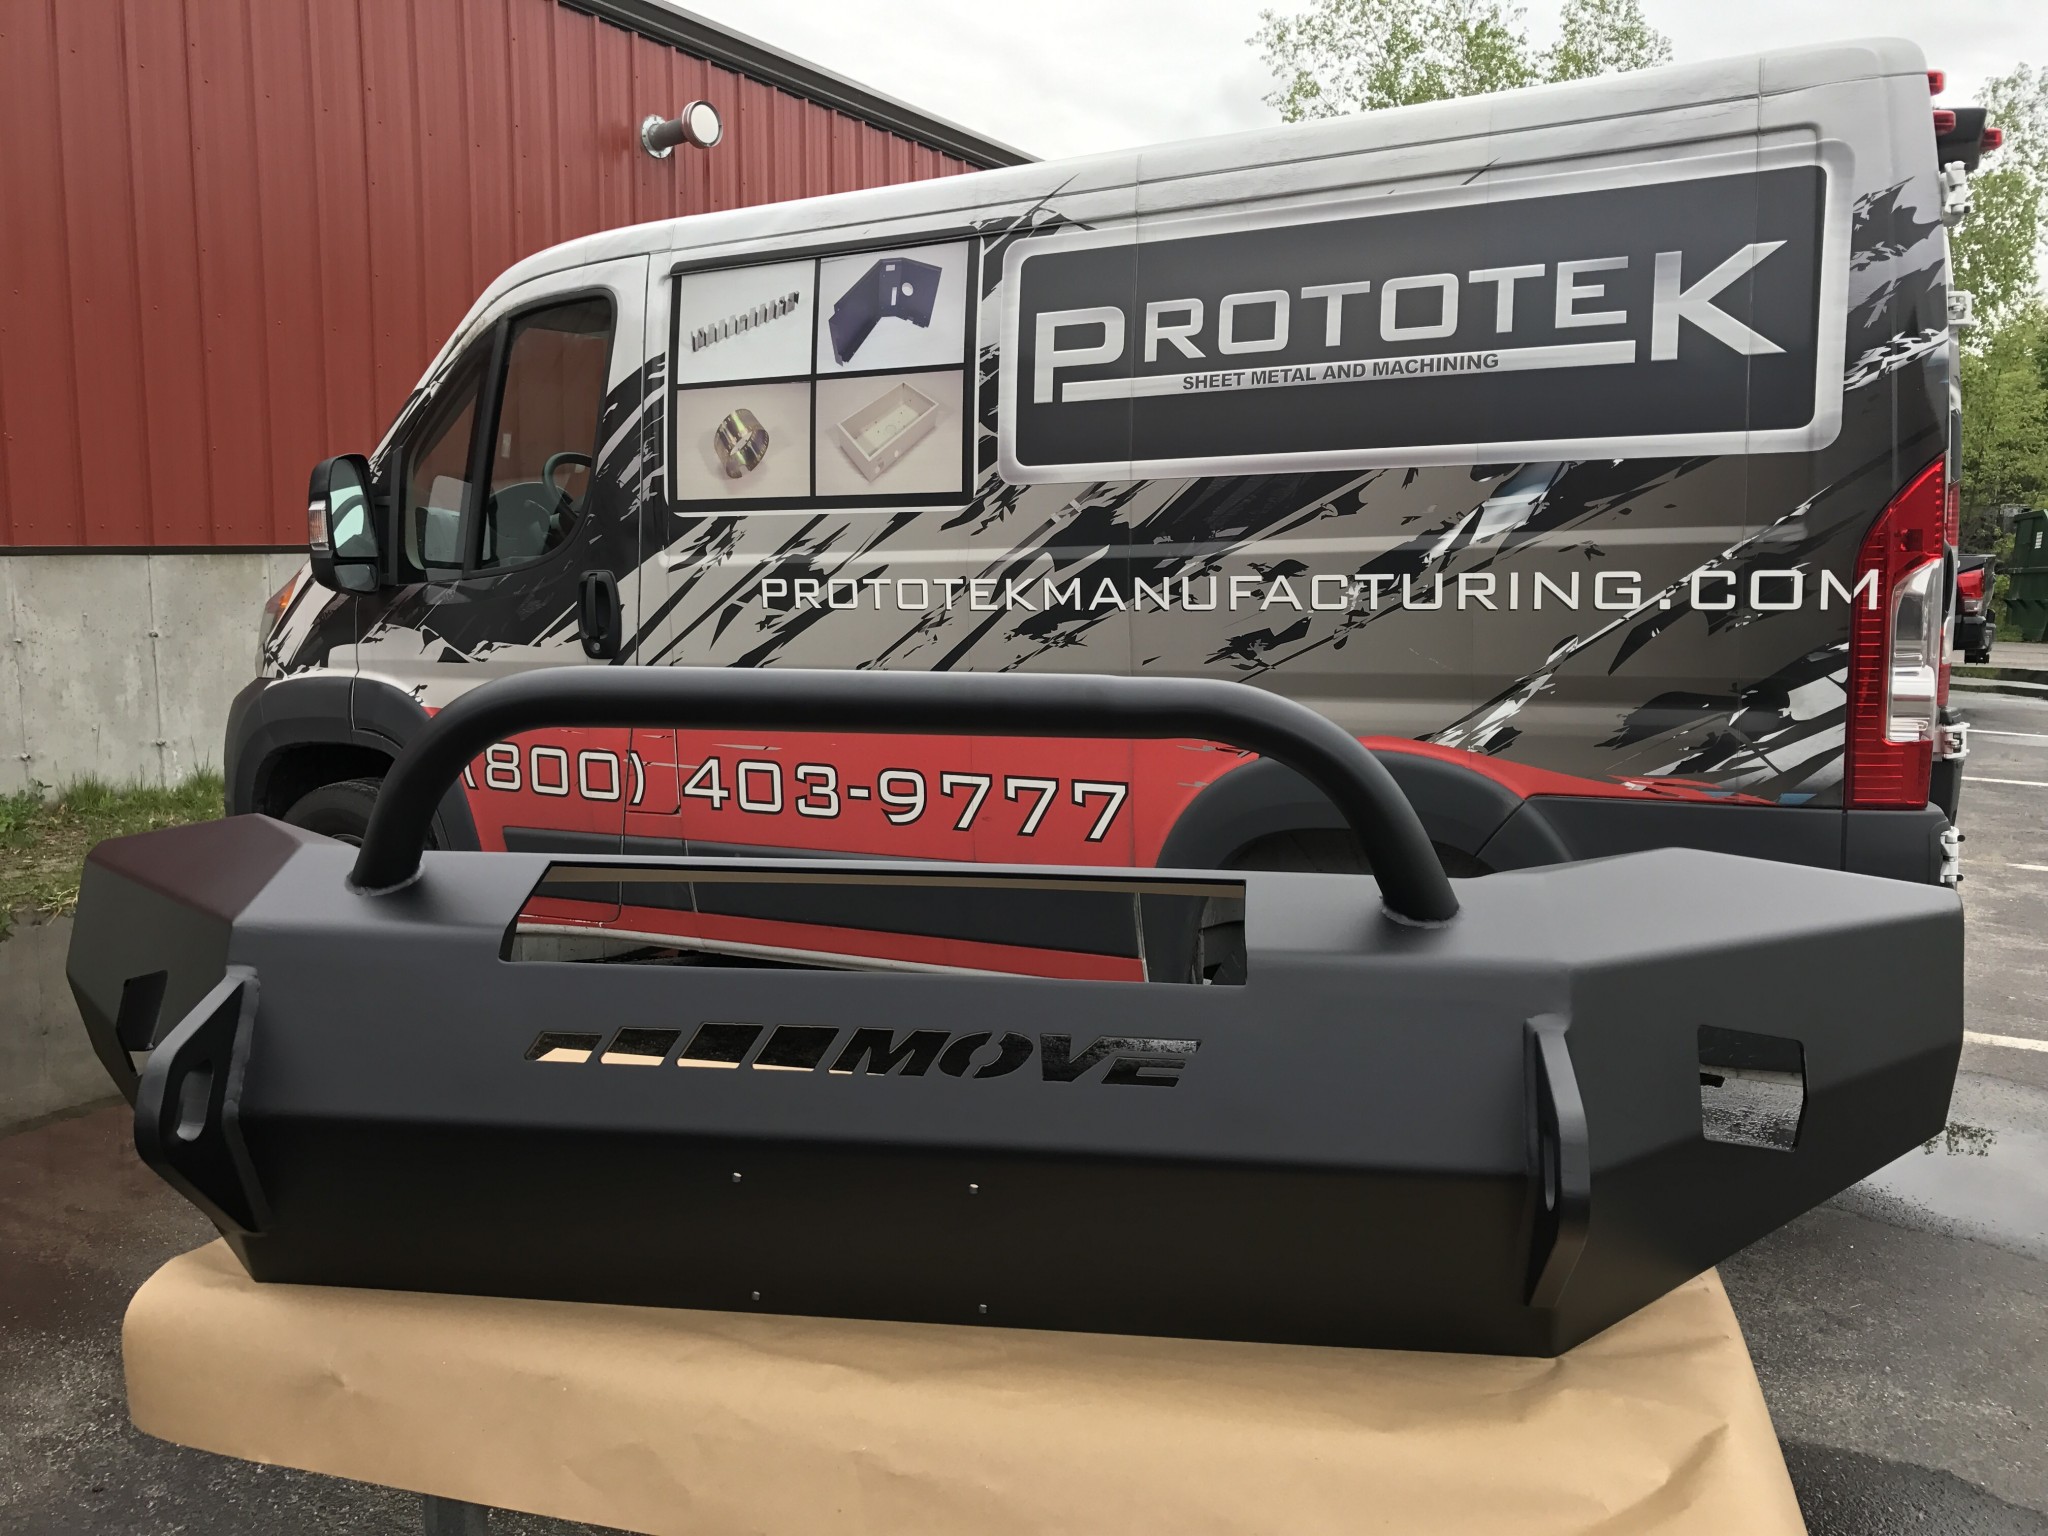 Prototyped part being displayed in front of a truck from Prototek.